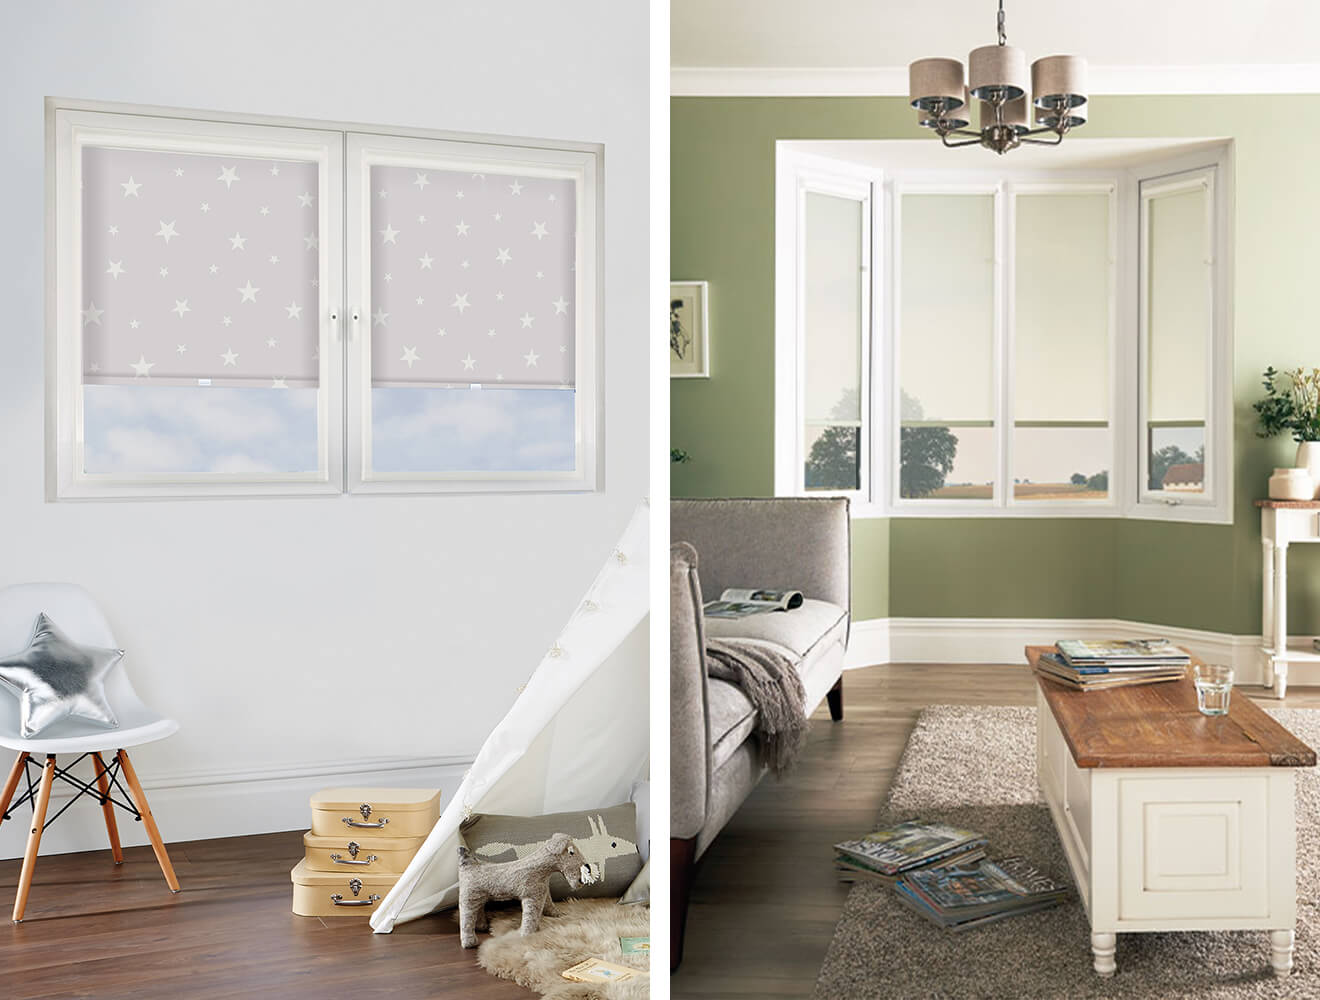 Examples of perfect fit blinds